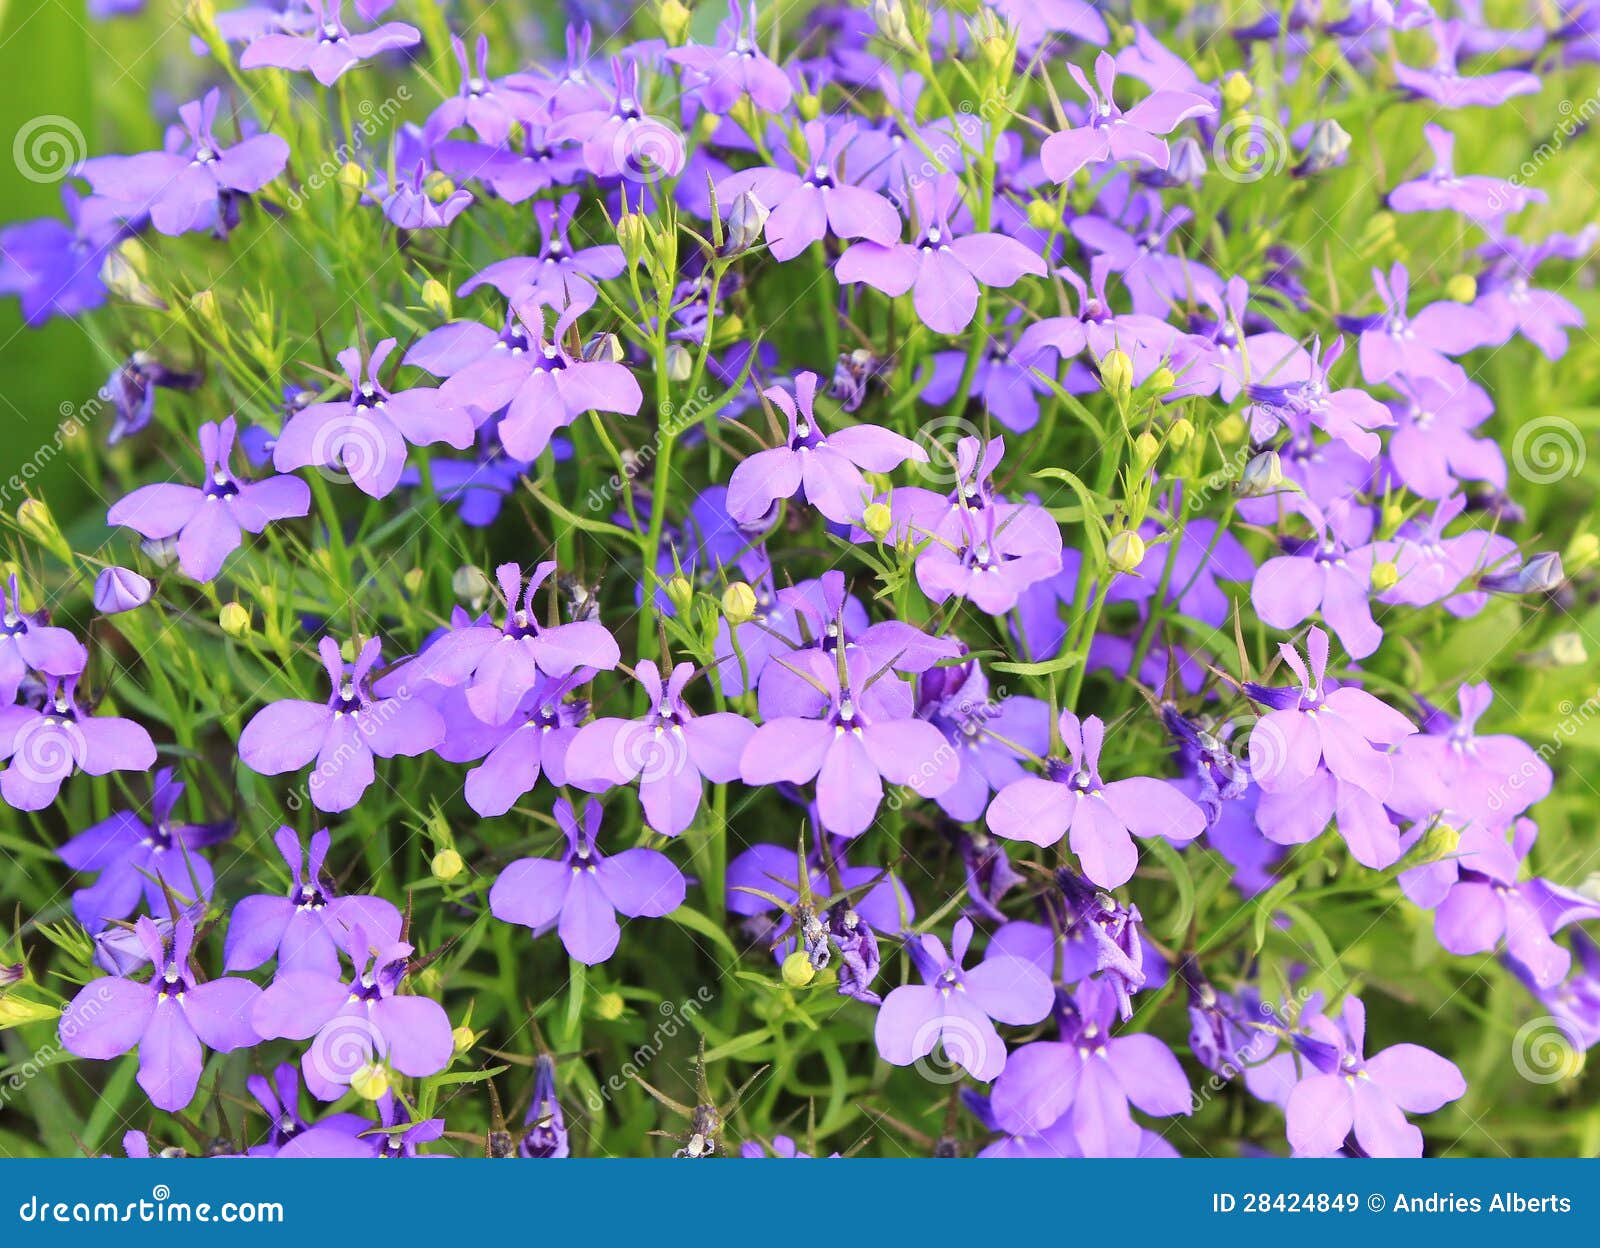 Blue Bell Beauty - Wild Flowers Stock Image - Image of emotions ...